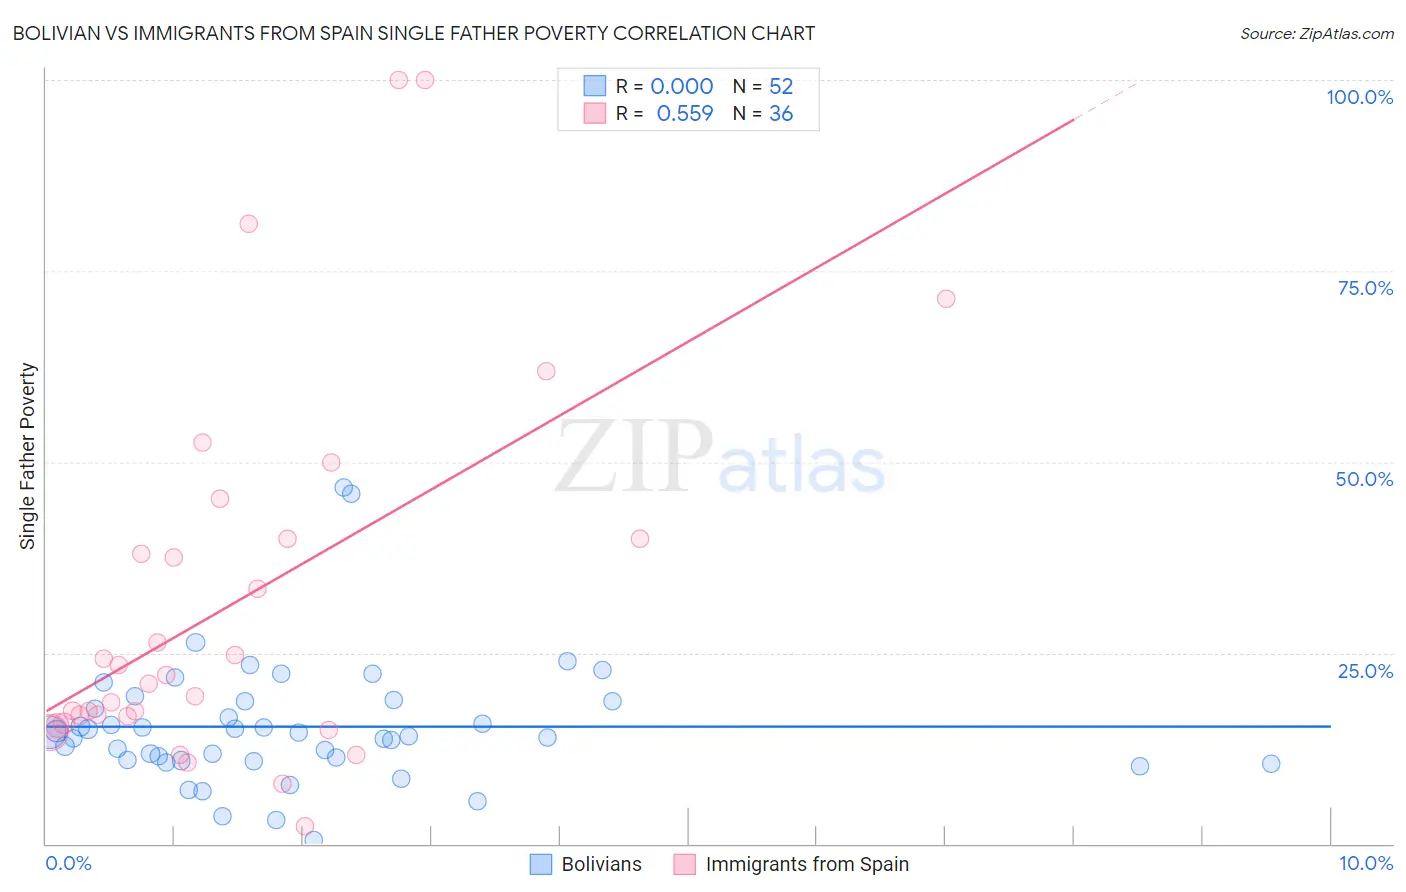 Bolivian vs Immigrants from Spain Single Father Poverty